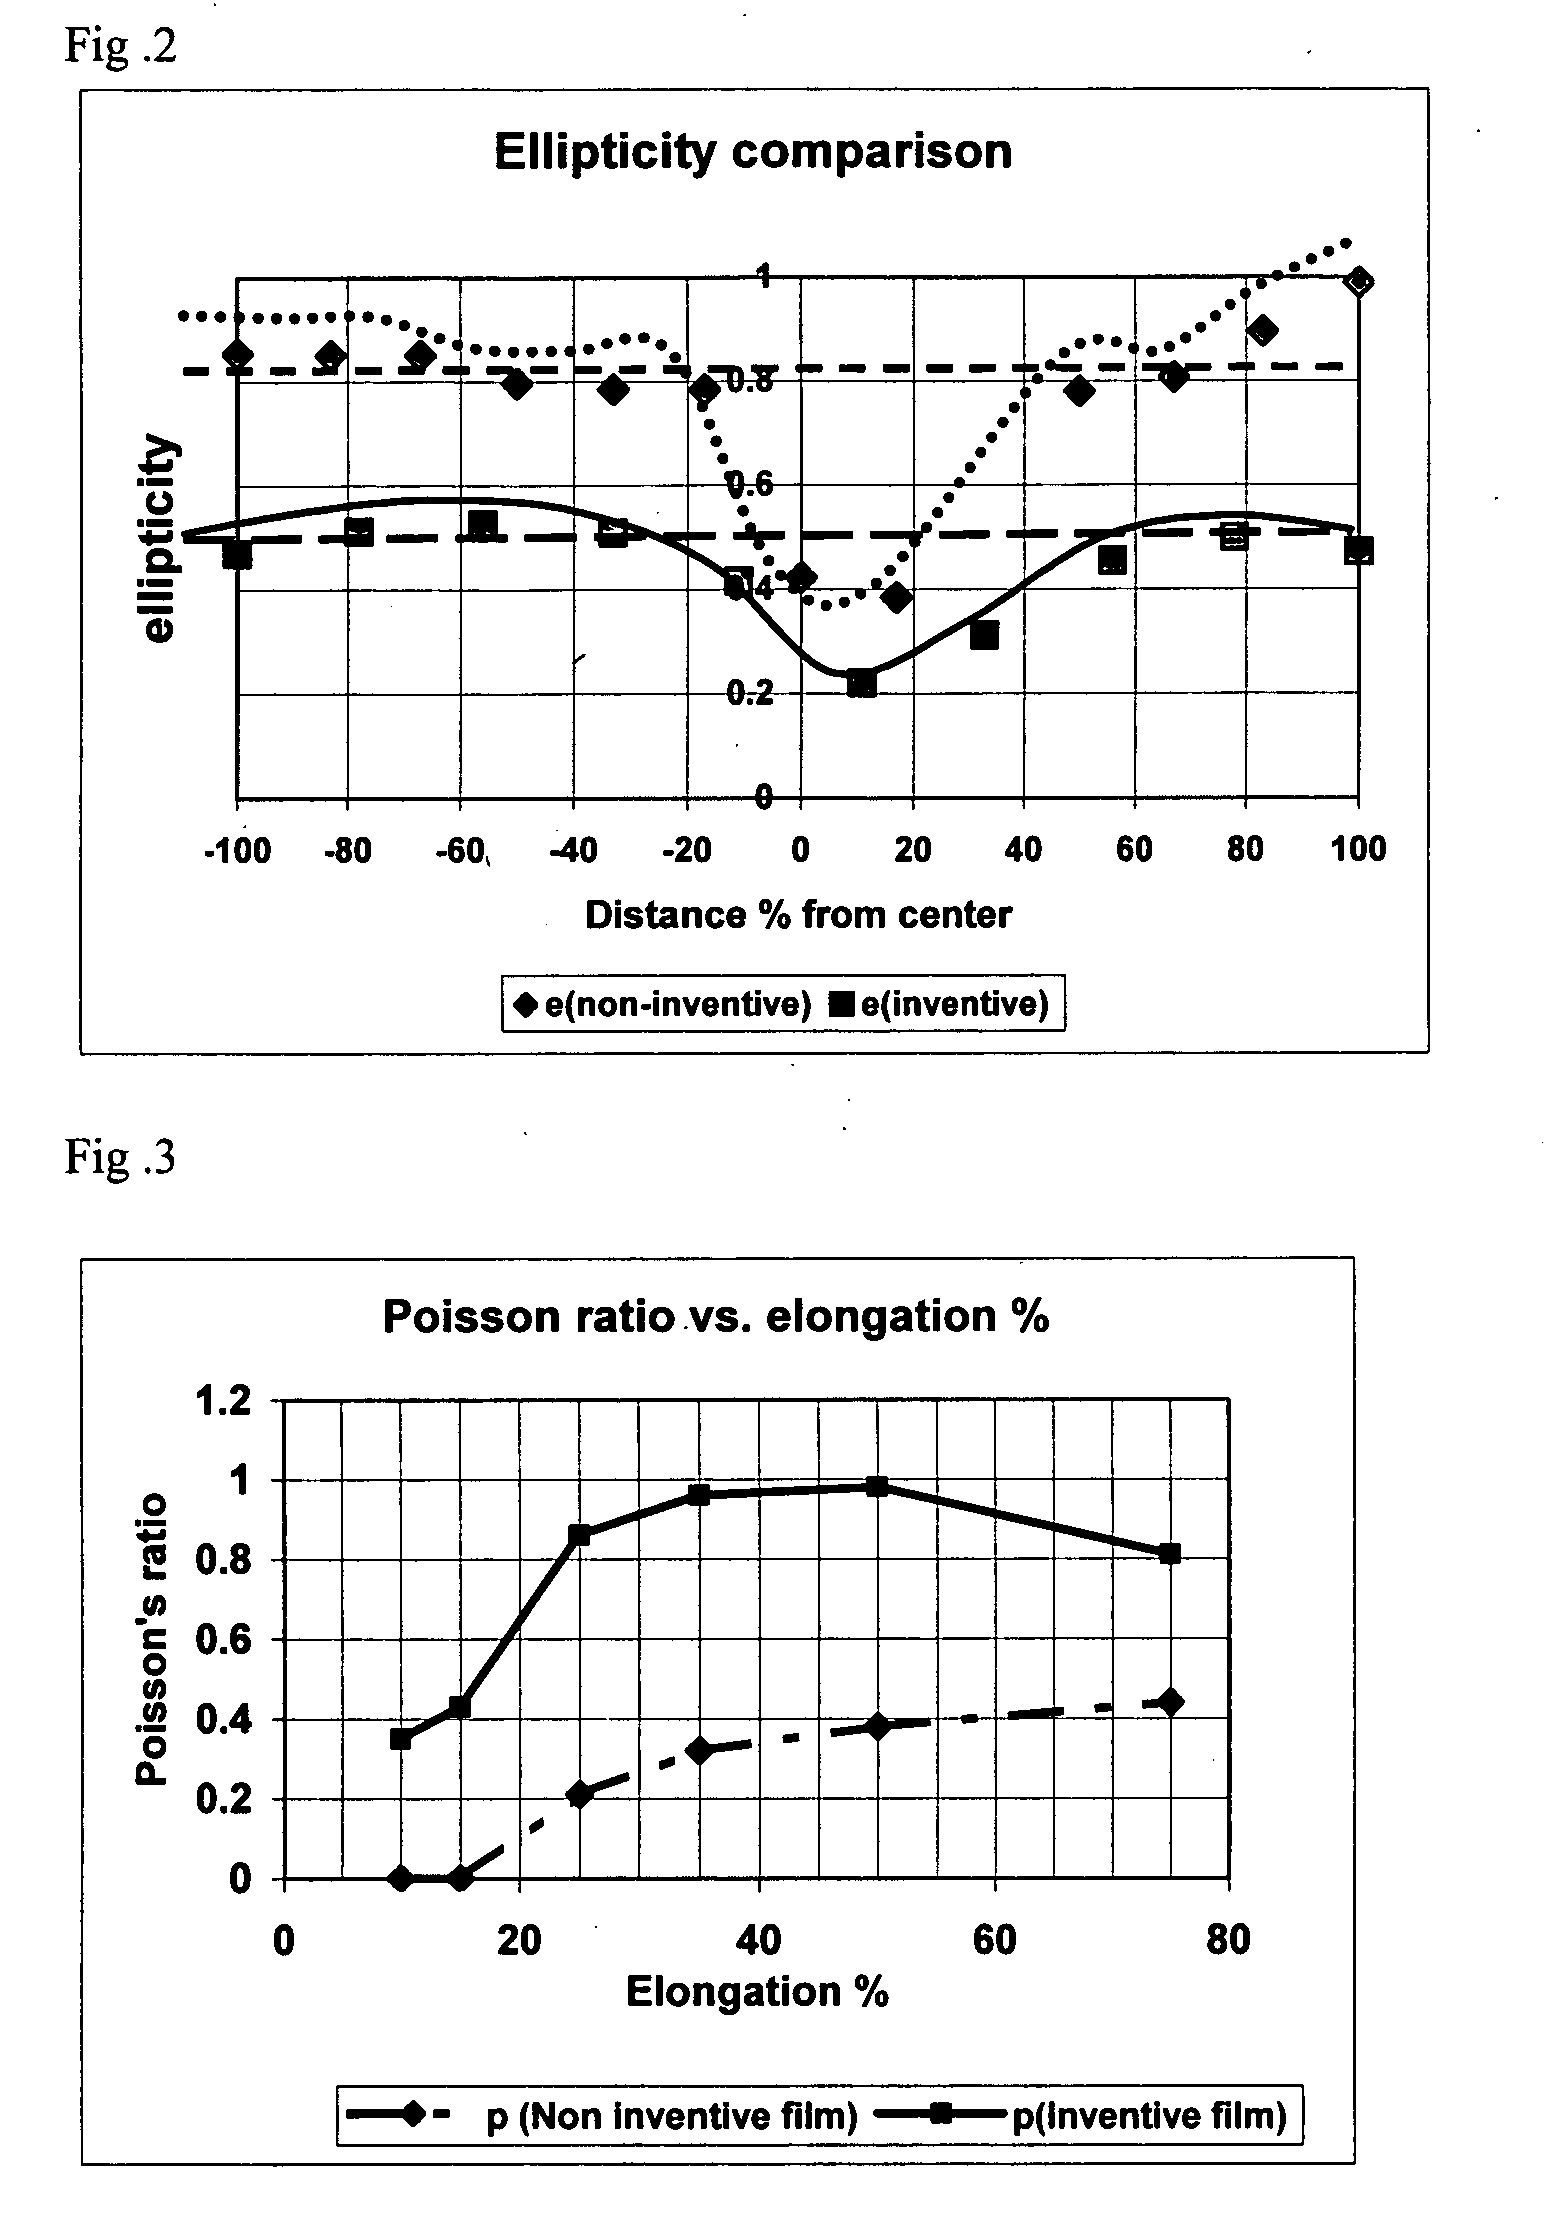 Biaxial oriented polyester film and a process for preparing same